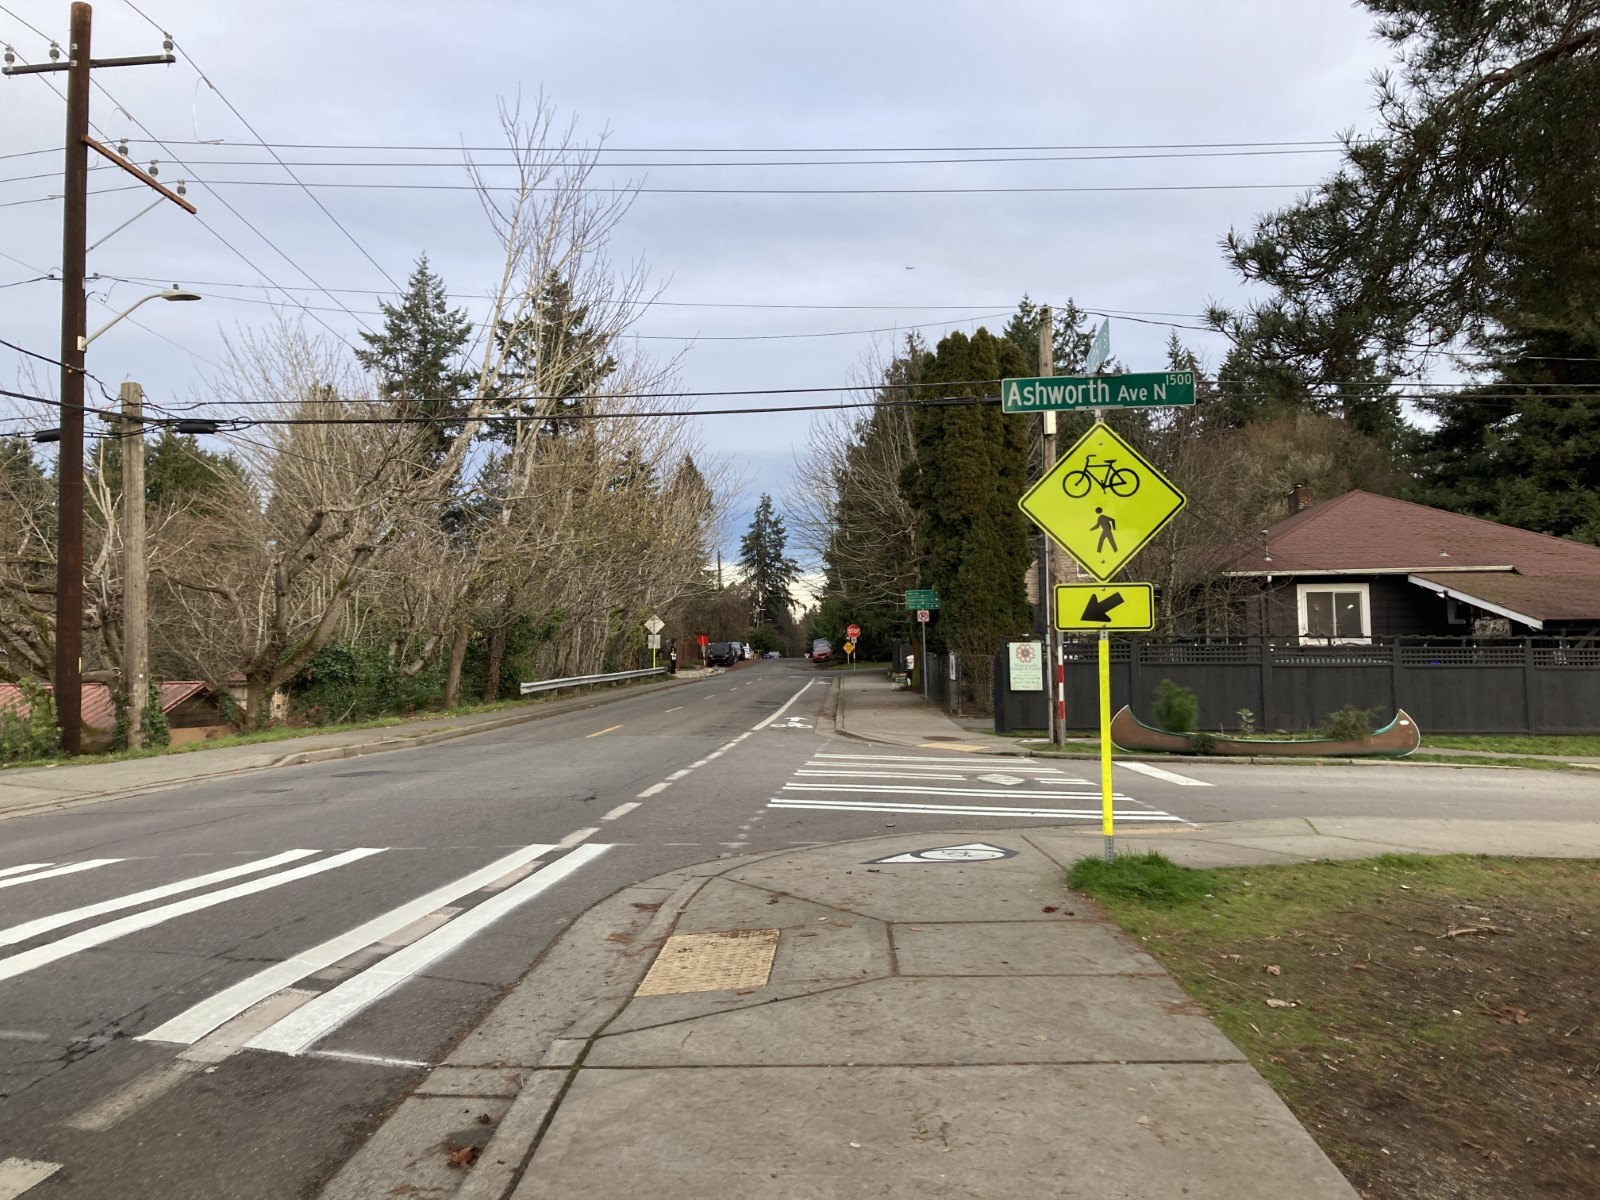 Completed marked crosswalk and painted bike dots at Ashworth Ave N & N 125th St